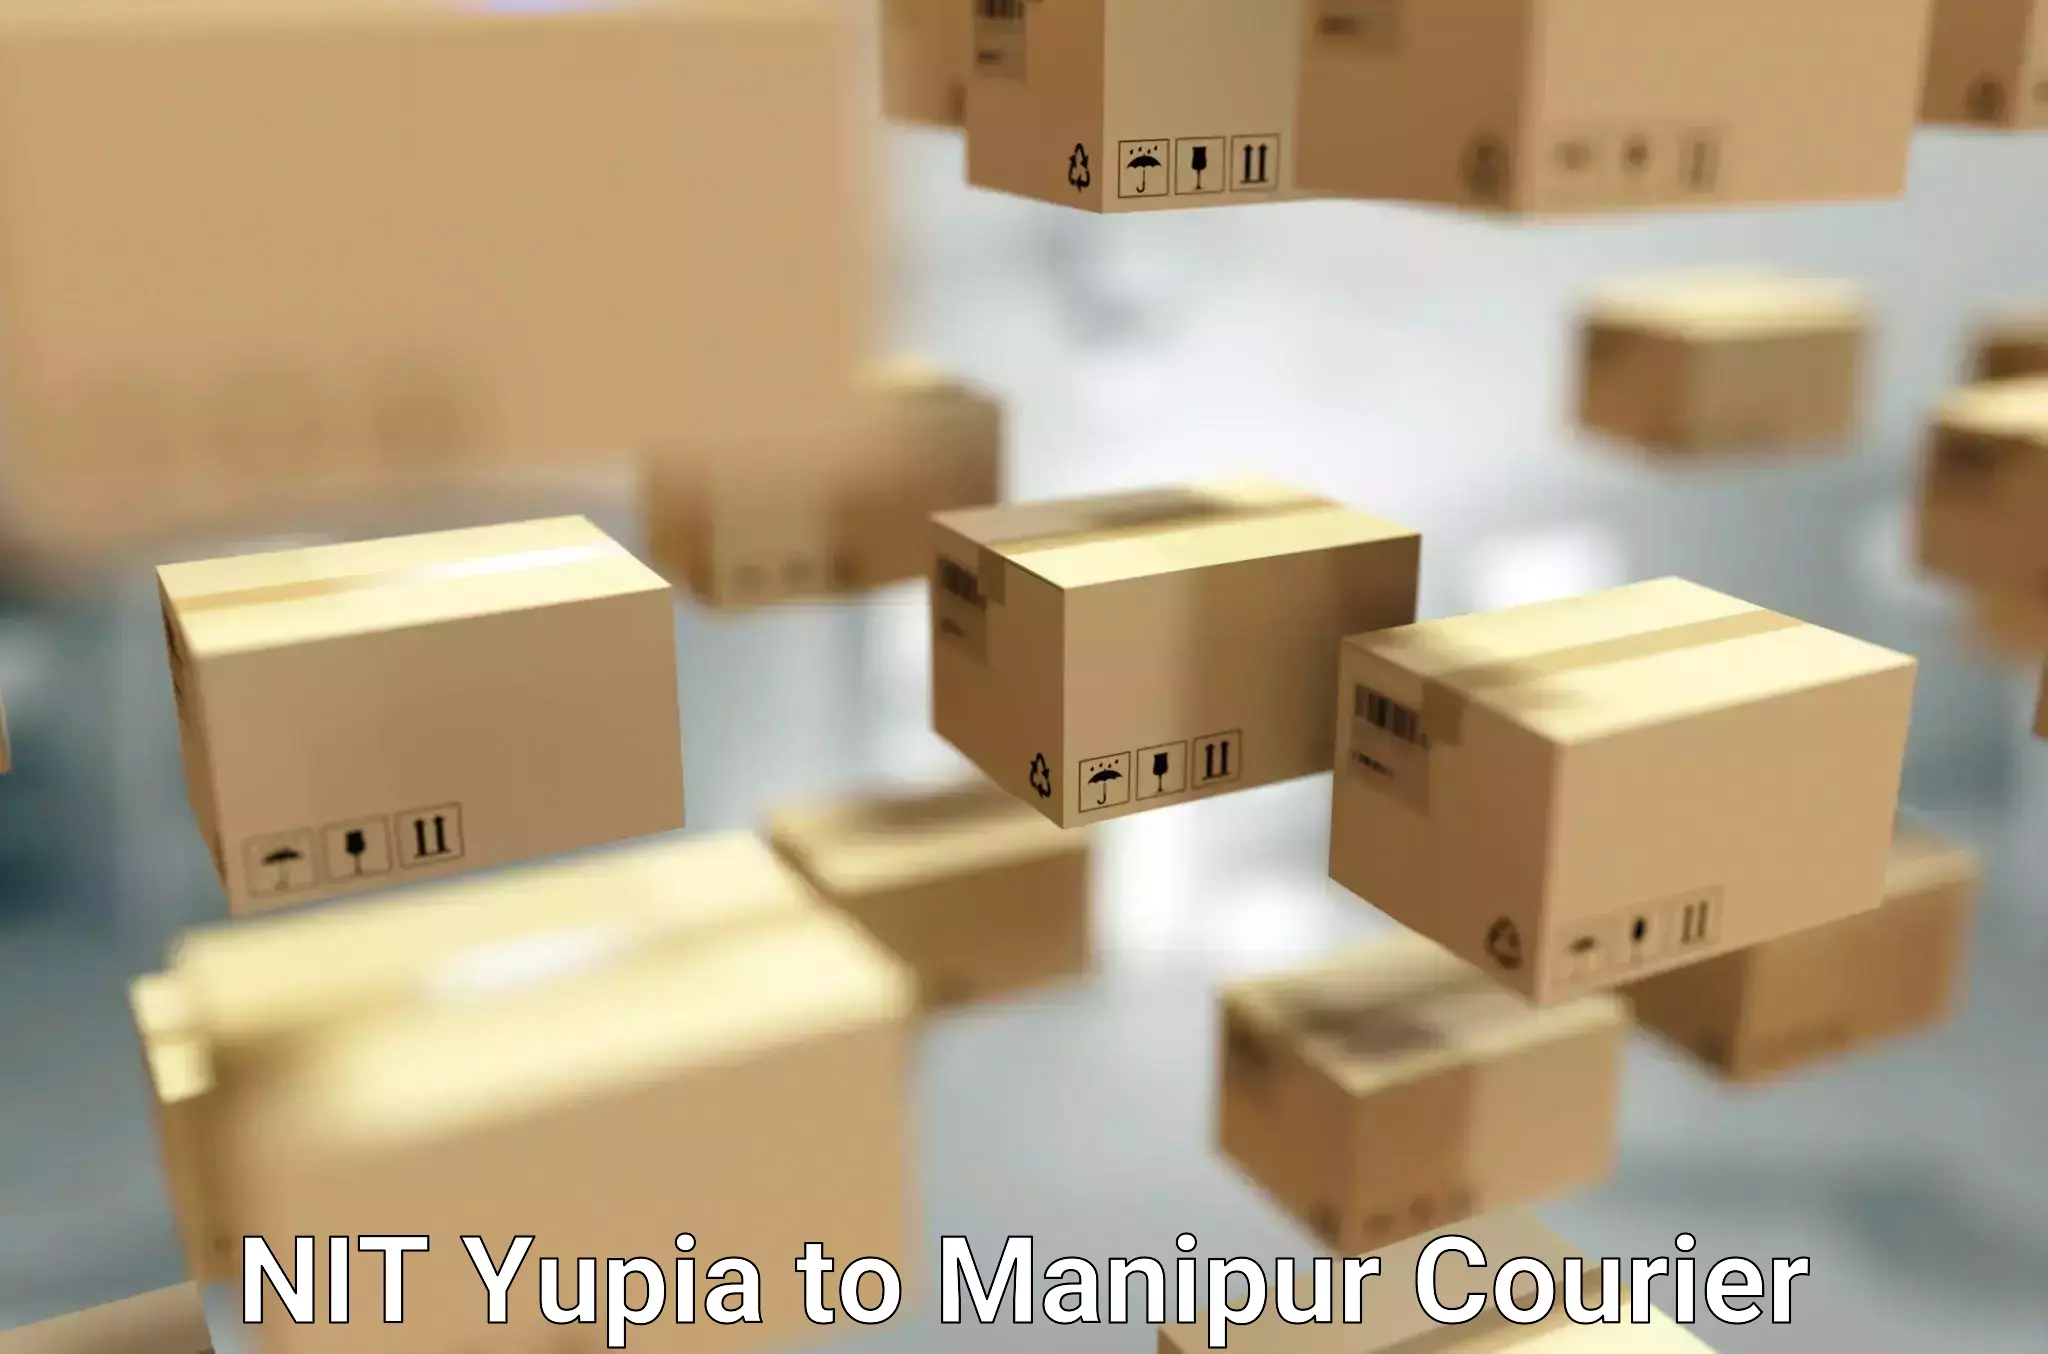 Door-to-door relocation services NIT Yupia to NIT Manipur